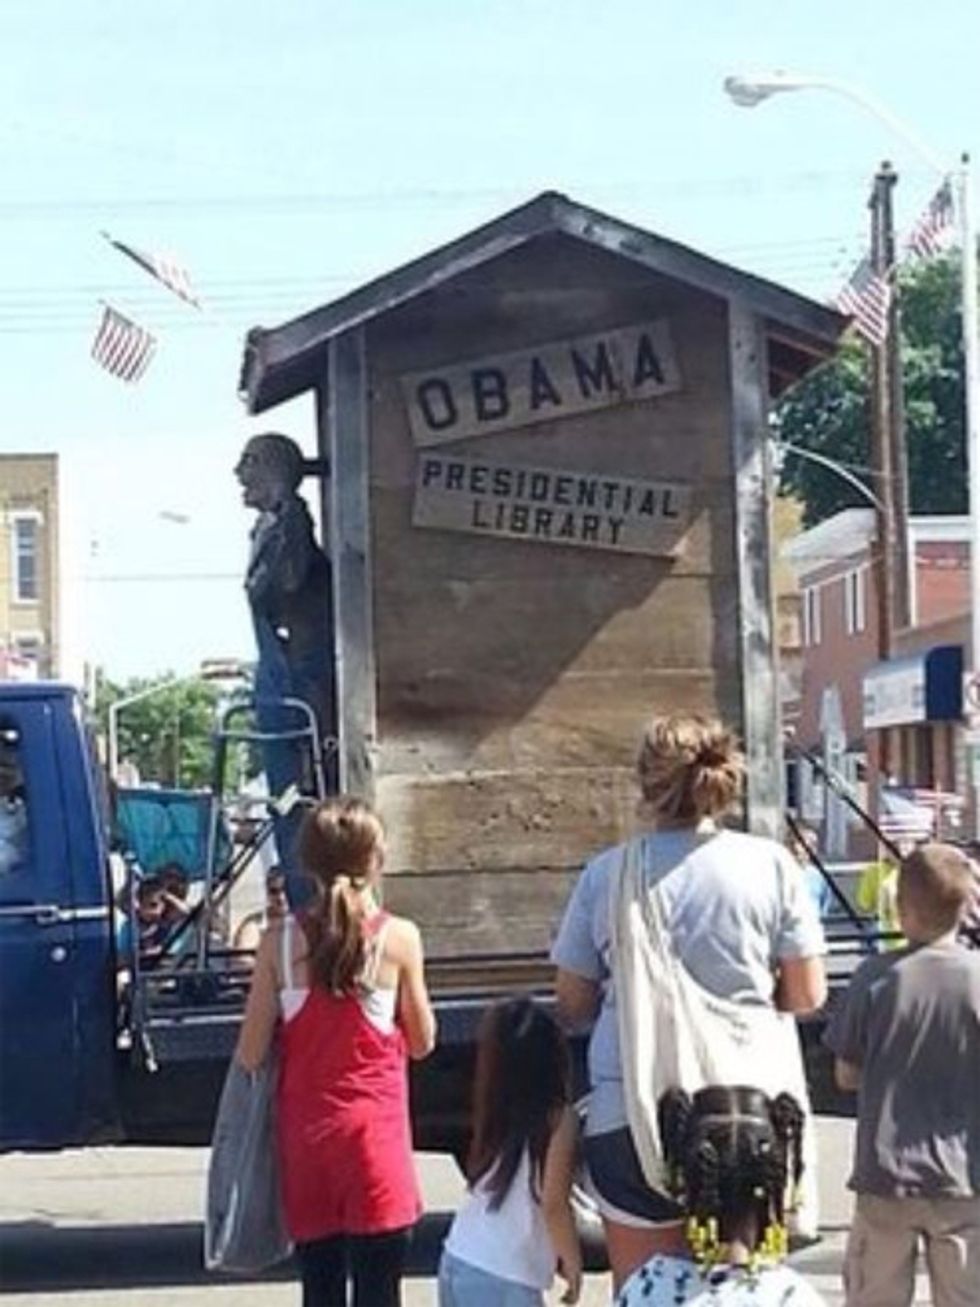 Cool Obama Presidential Library Outhouse Parade Float Is What America Is All About